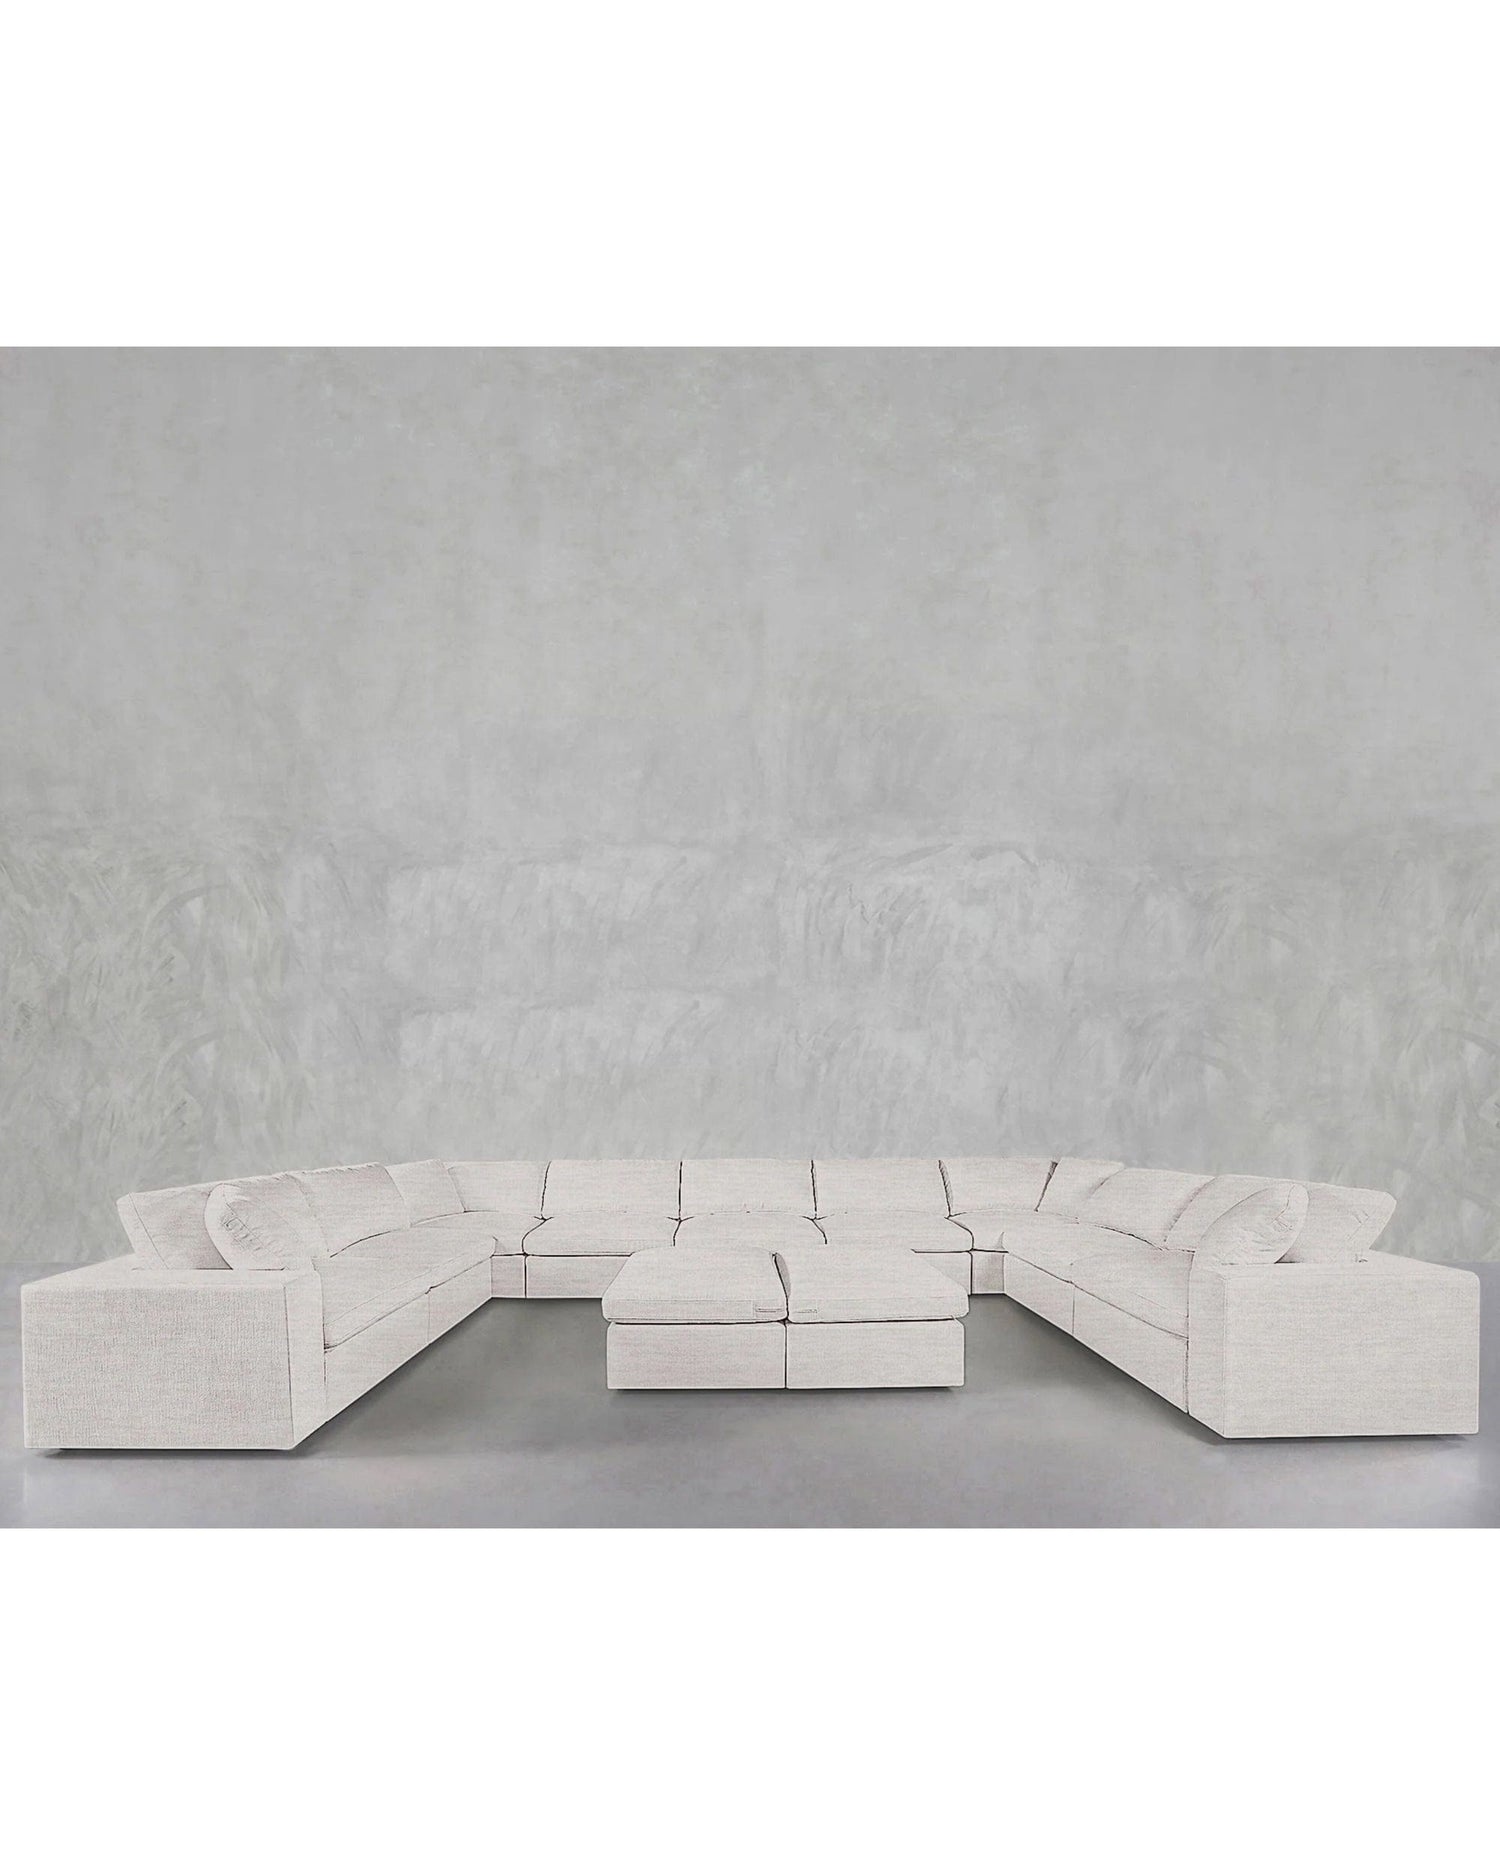 7th Avenue 9-Seat Modular U-Sectional with Double Ottoman